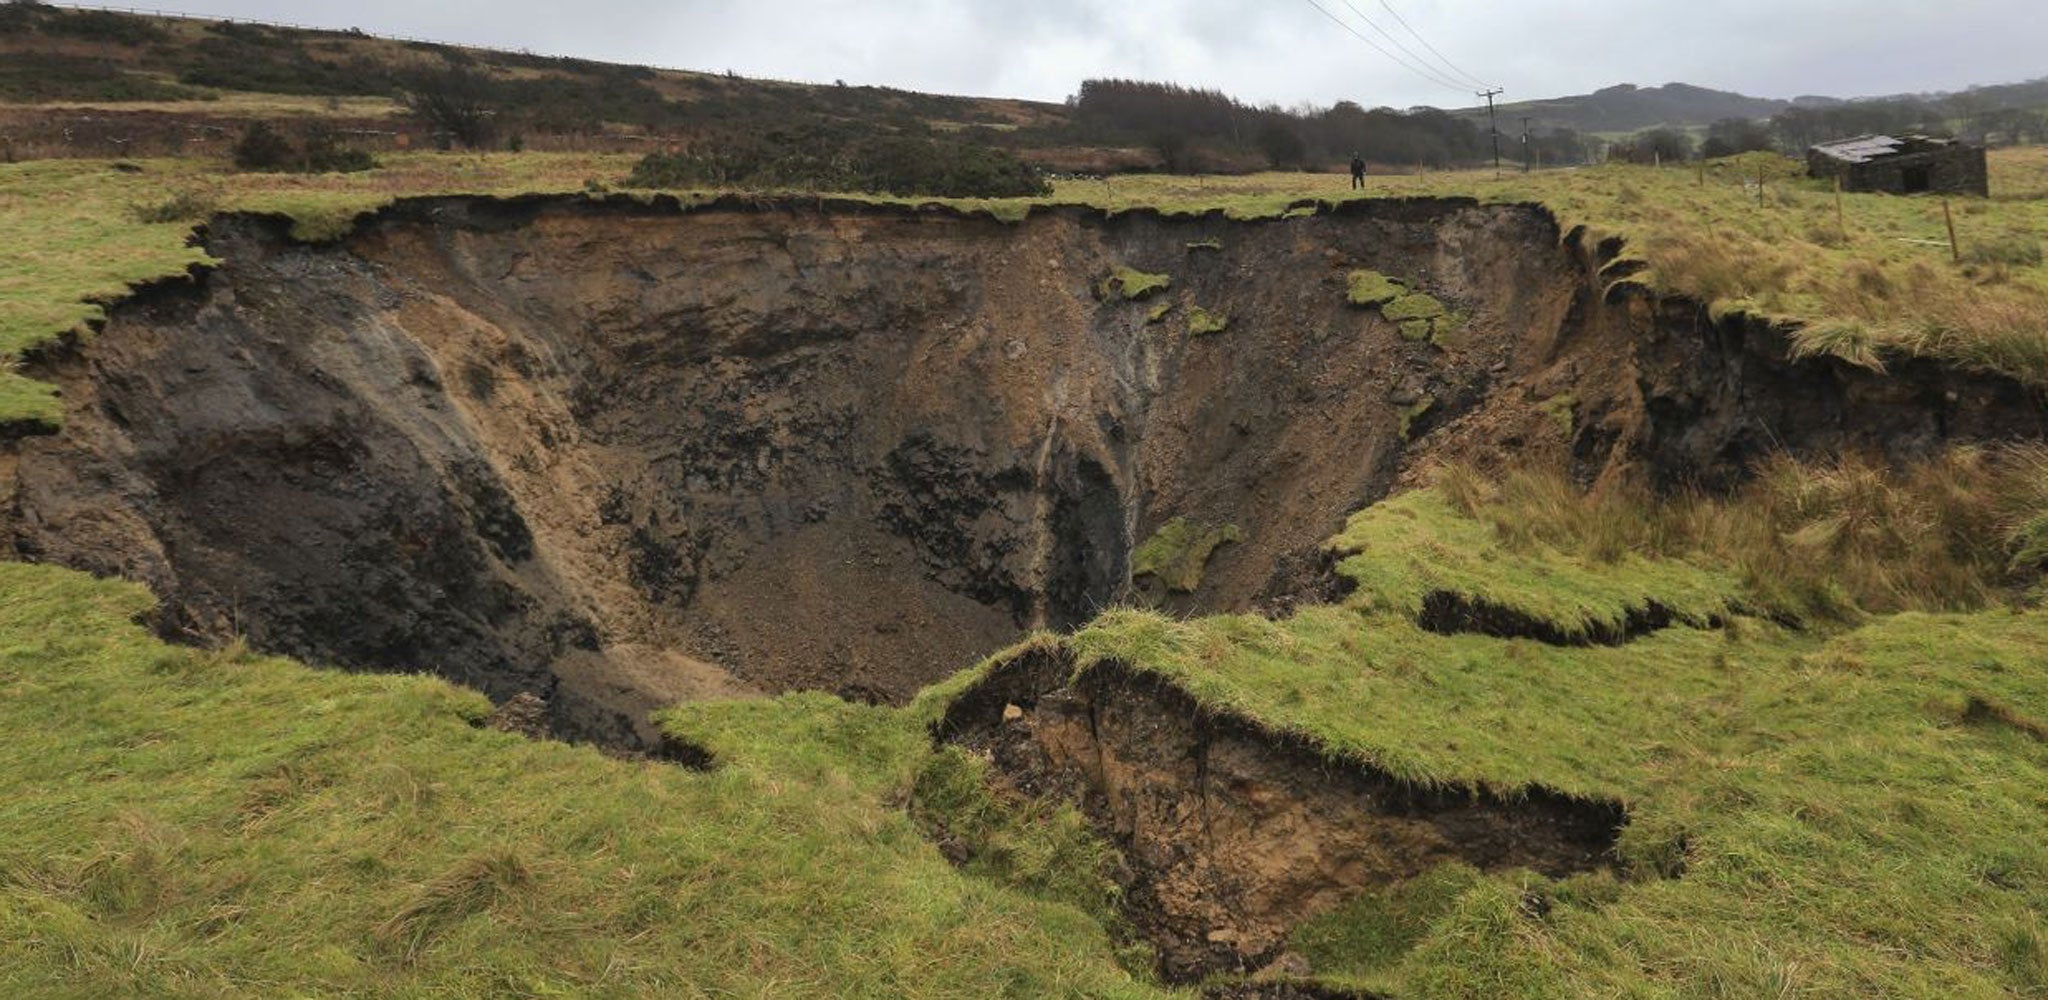 A giant sink hole has opened in Derbyshire